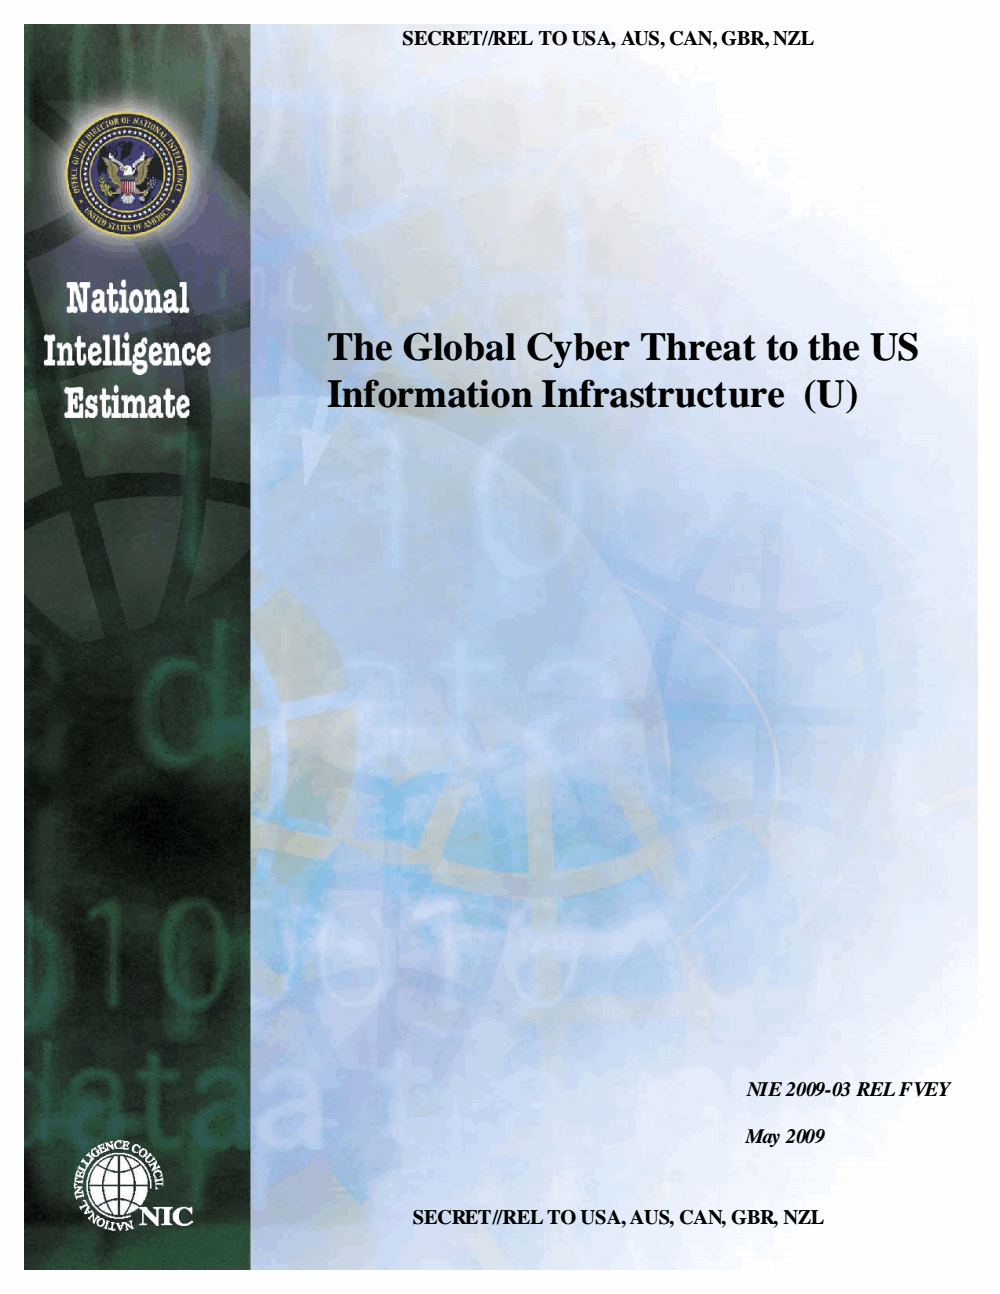 Page 1 from National Intelligence Estimate 2009 Global Cyber Threat – Supply Chain Excerpts